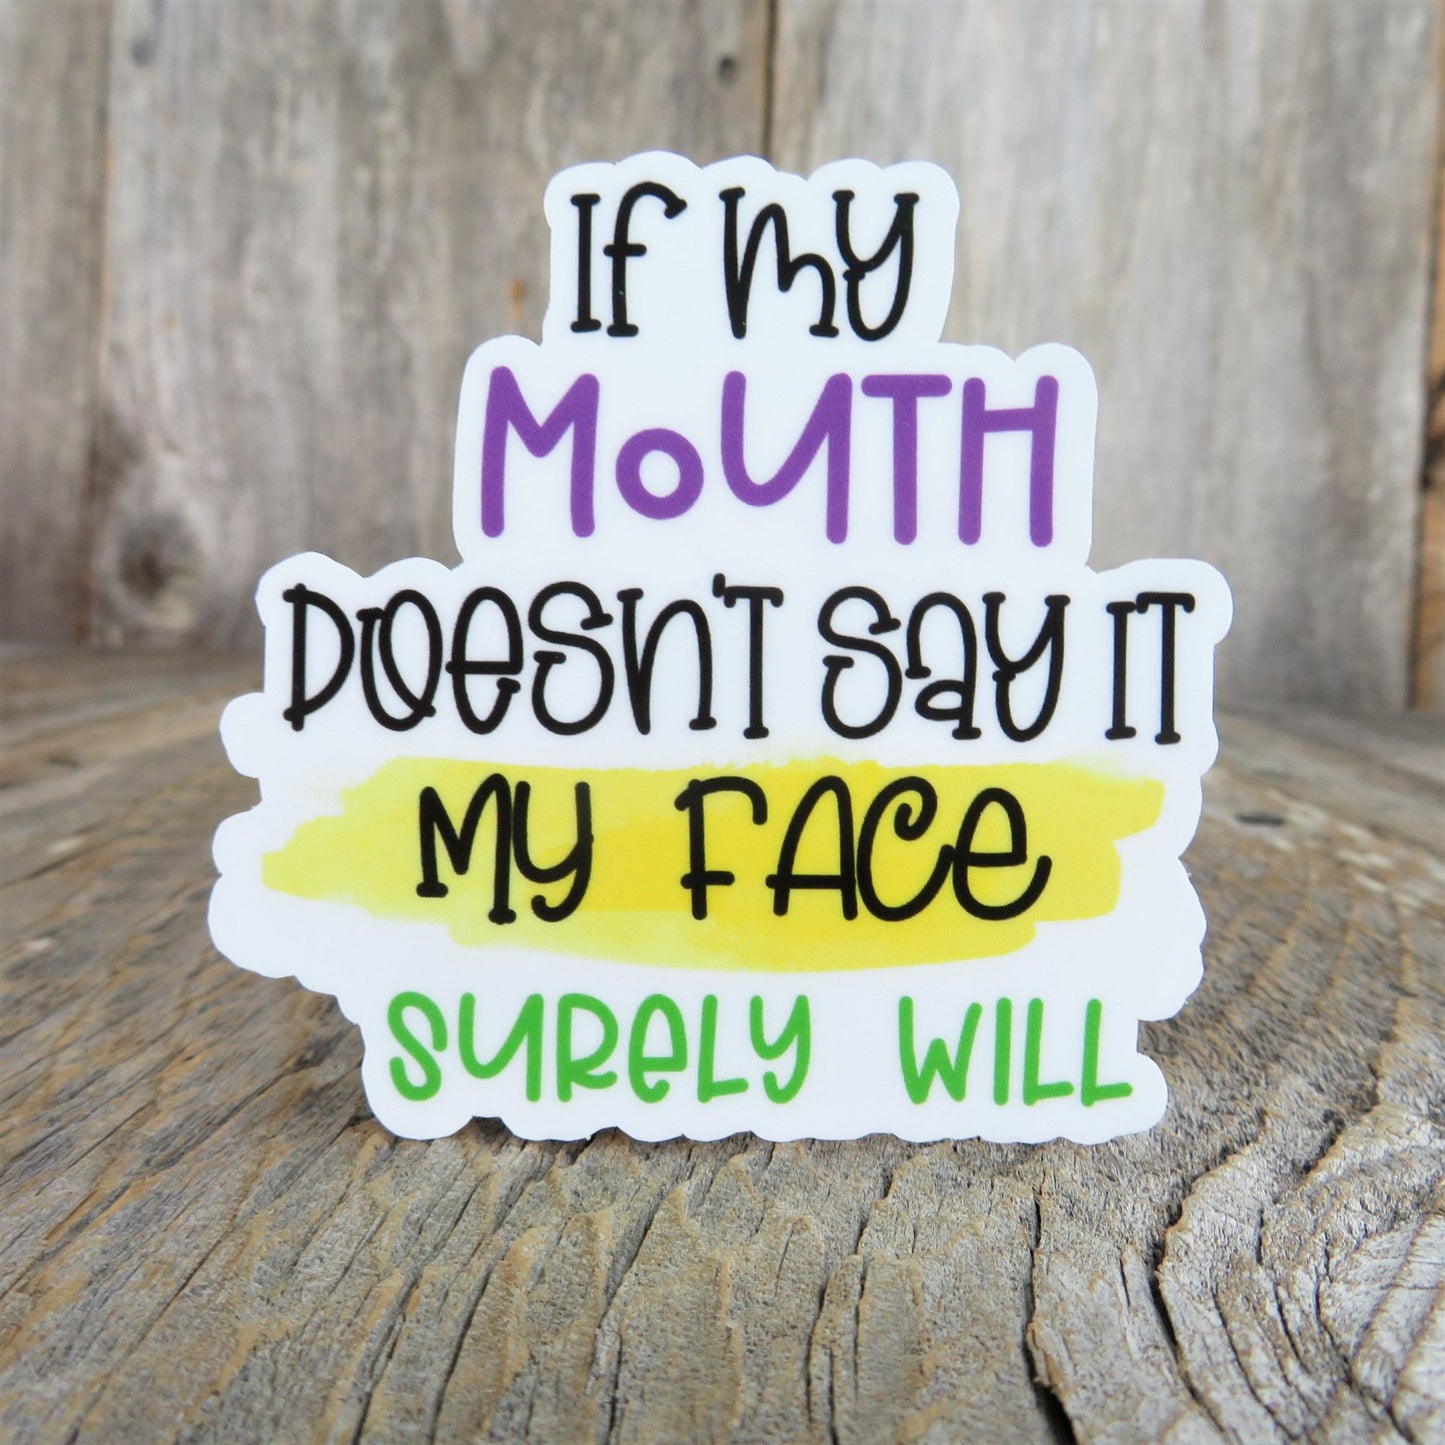 If My Mouth Doesn't Say It My Face Surely Will Sticker Waterproof Full Color Social Funny Sarcastic Bitch Face